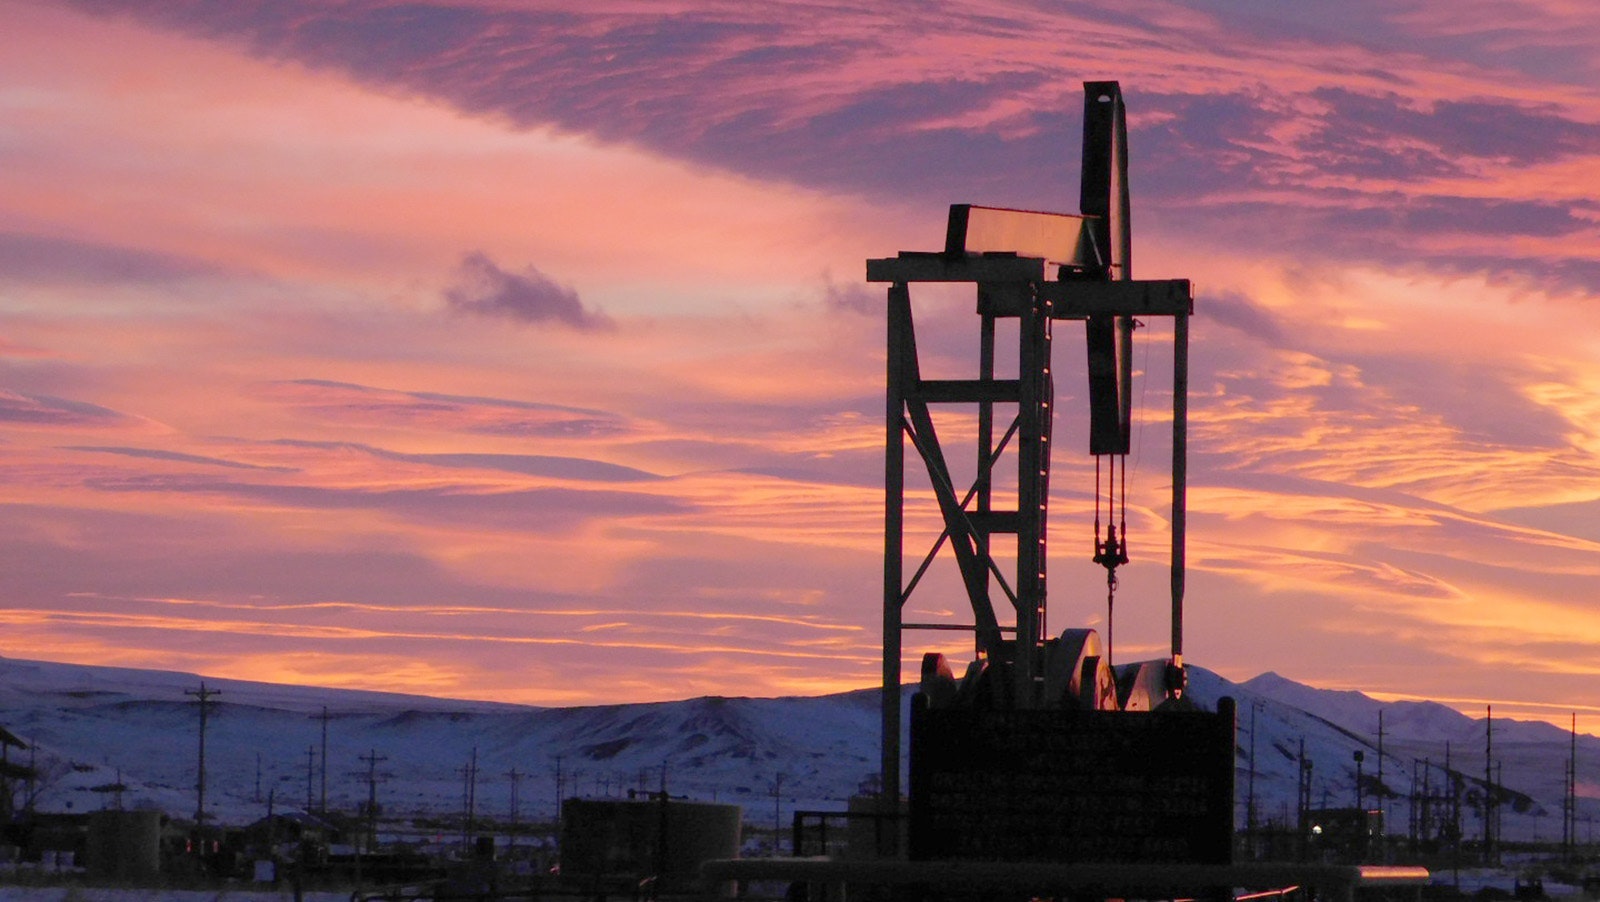 The sunrise silhouettes this pumpjack in rural Wyoming along Tebra Morris' mail route.